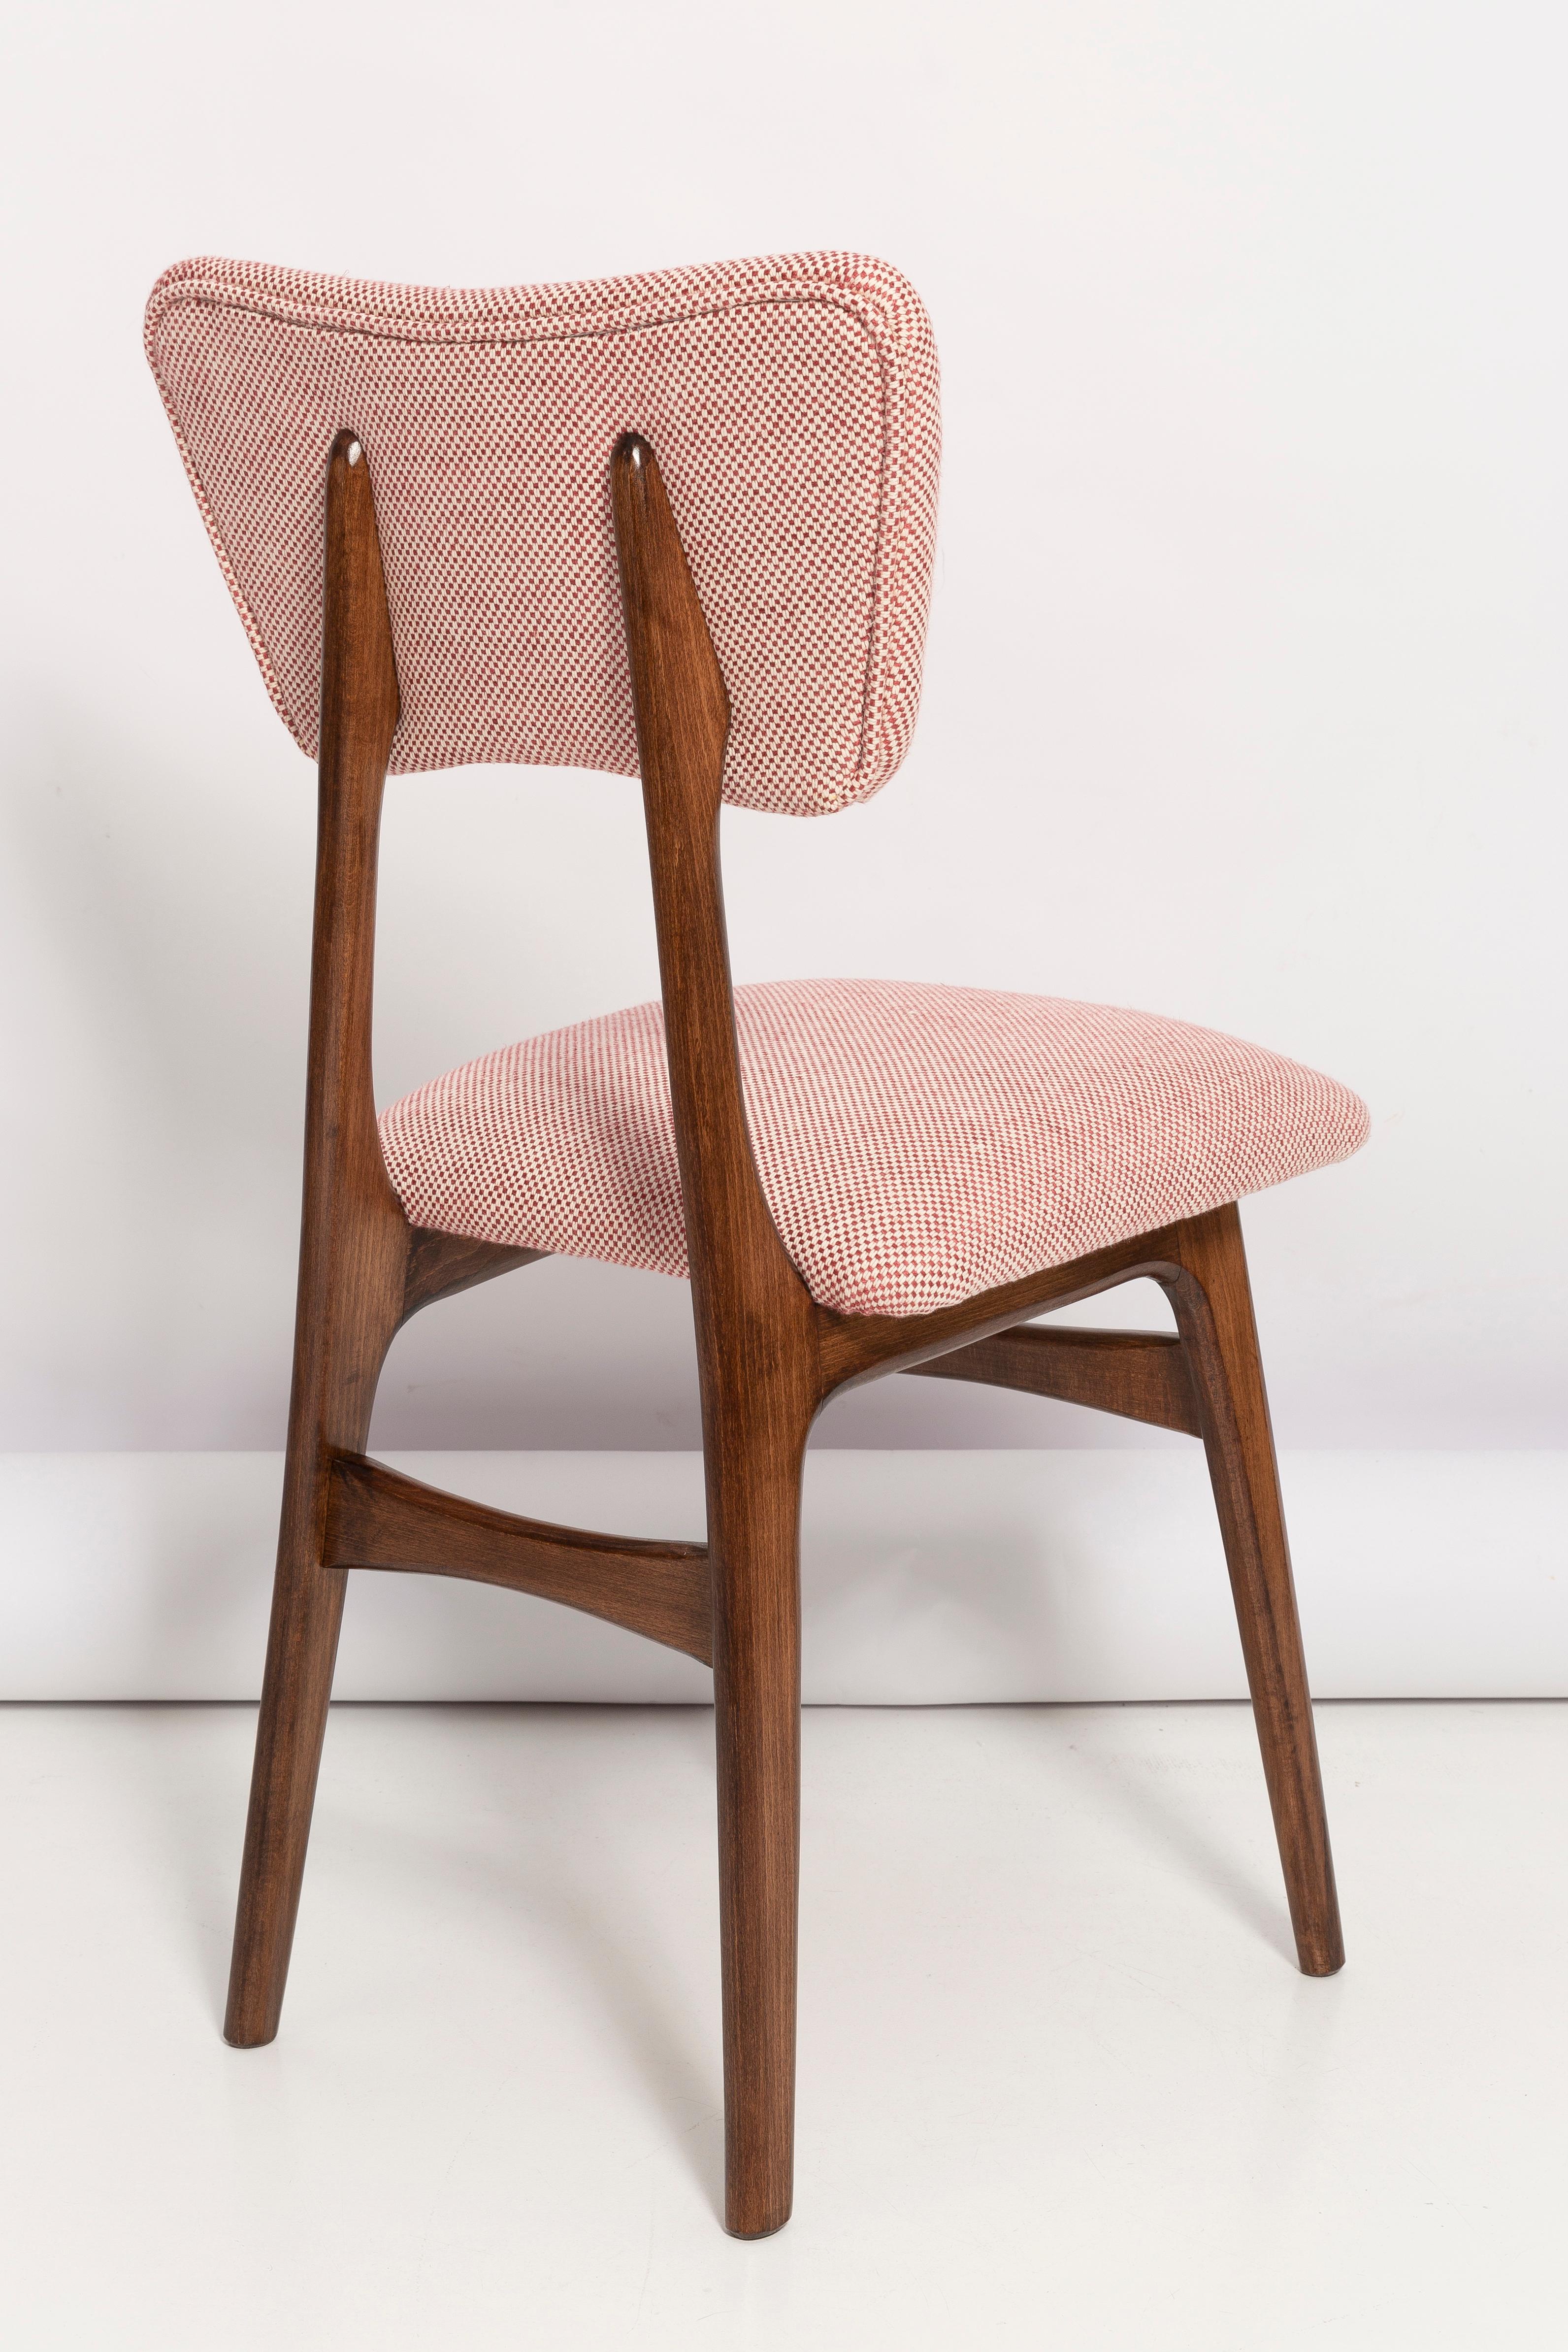 Set of Eight Mid Century Butterfly Dining Chairs, Peony Cotton, Poland, 1960s For Sale 2